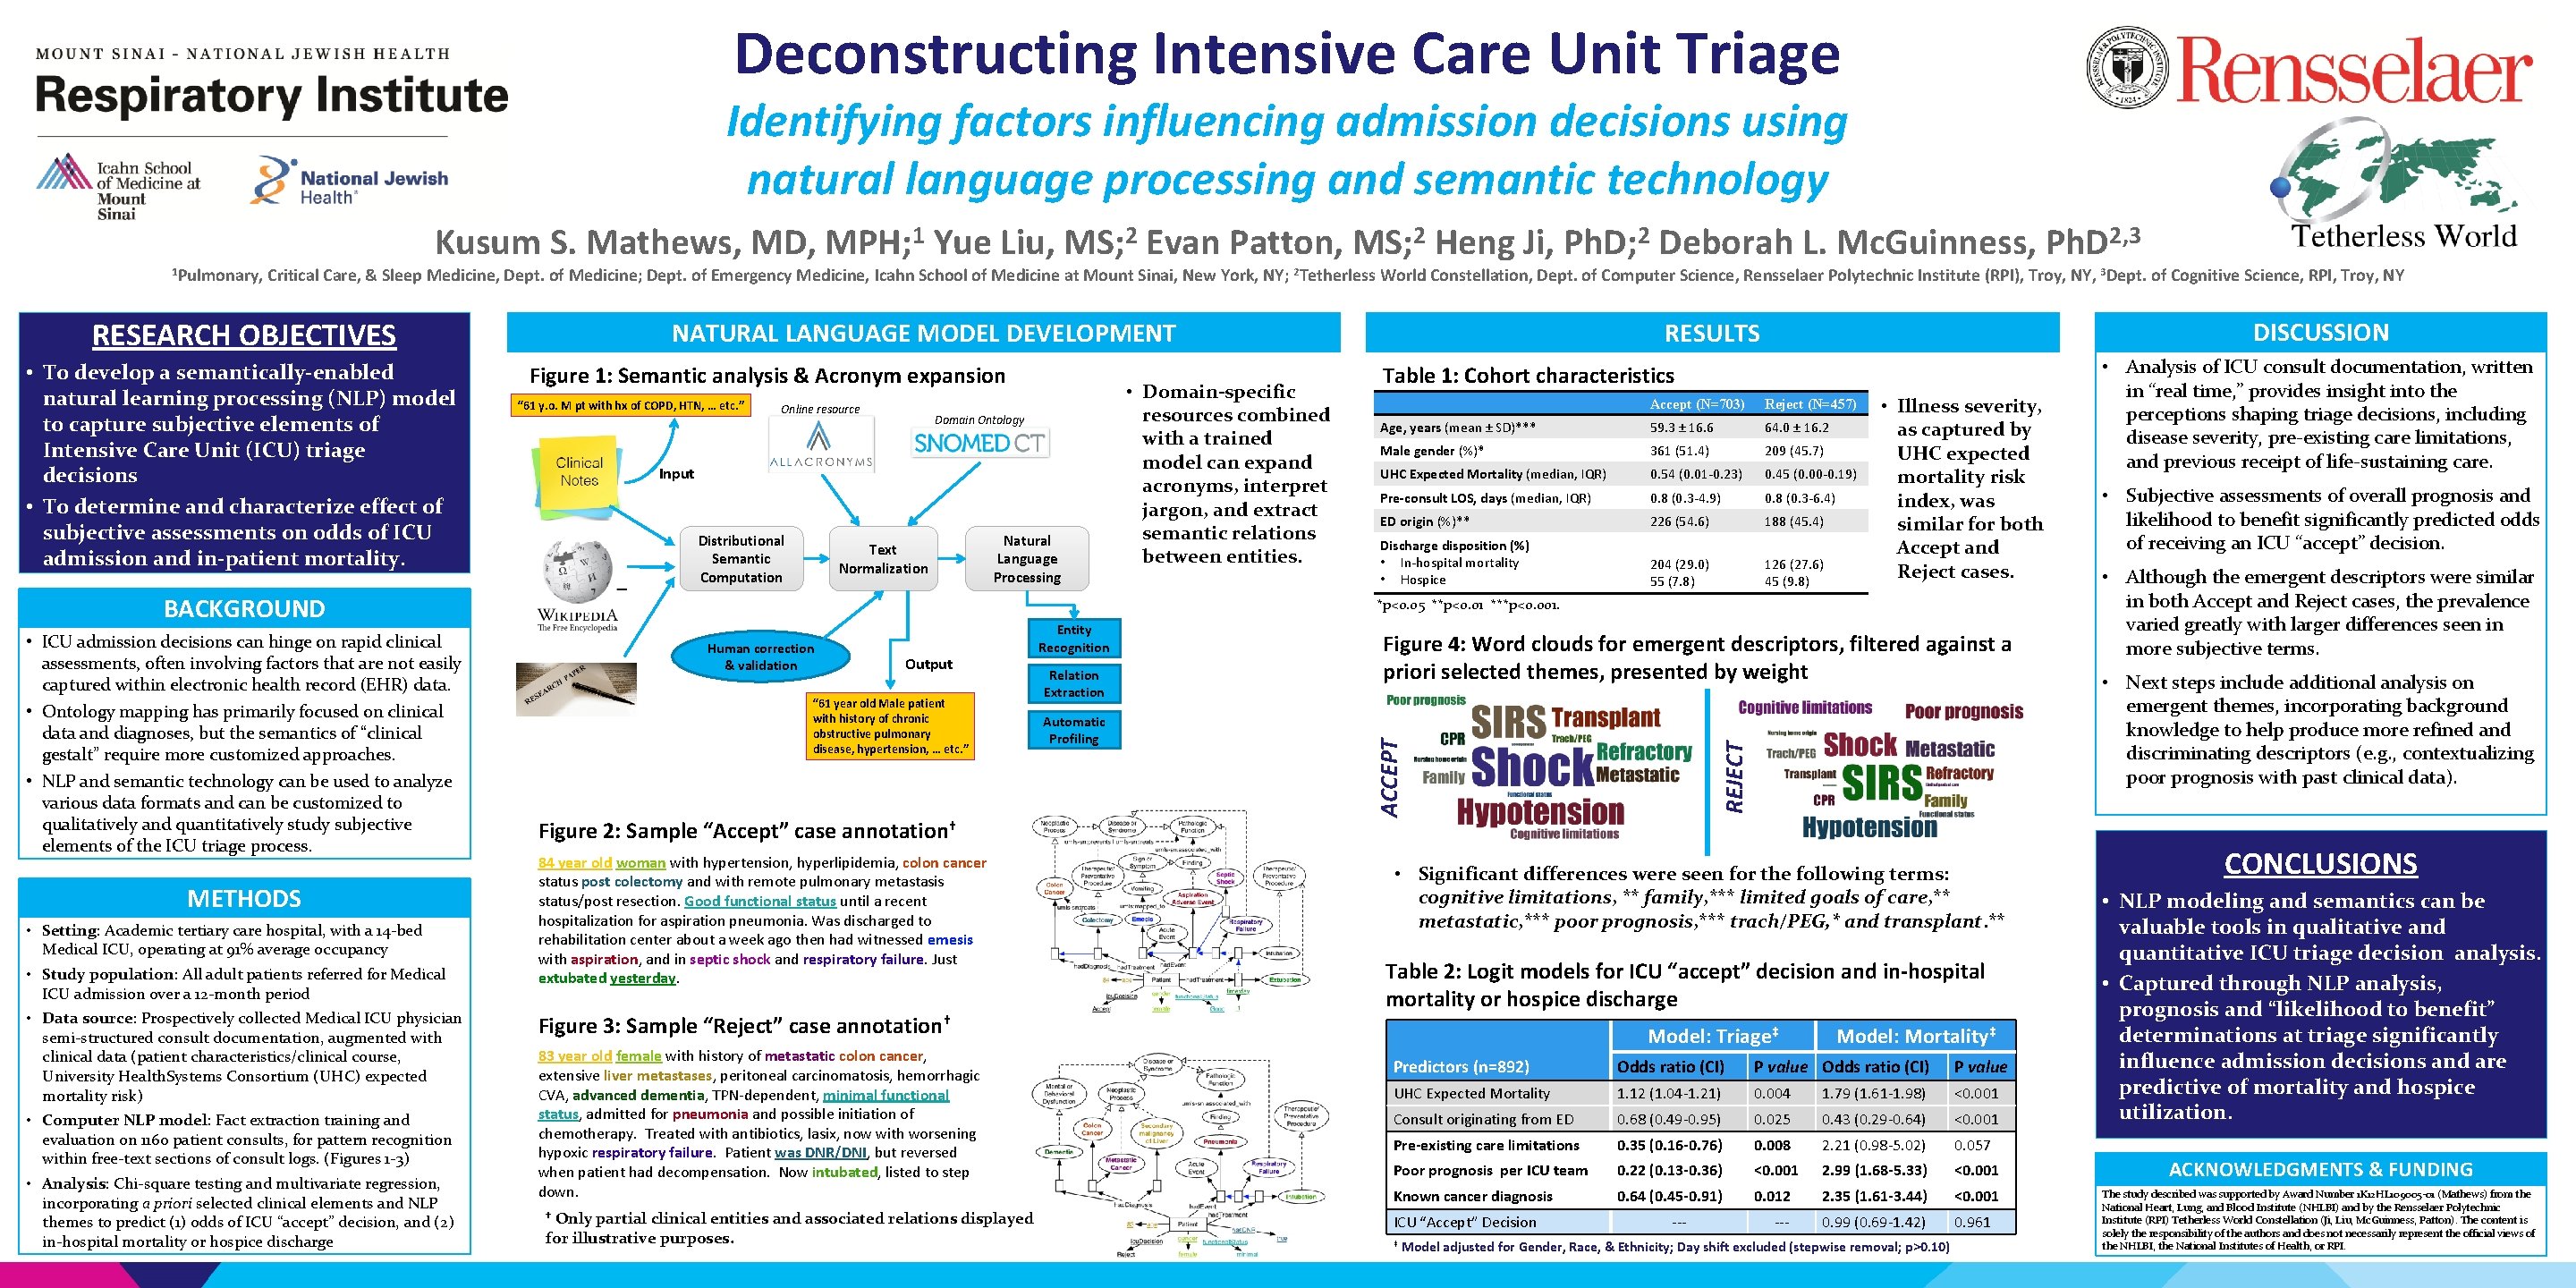 Deconstructing Intensive Care Unit Triage Identifying factors influencing admission decisions using natural language processing